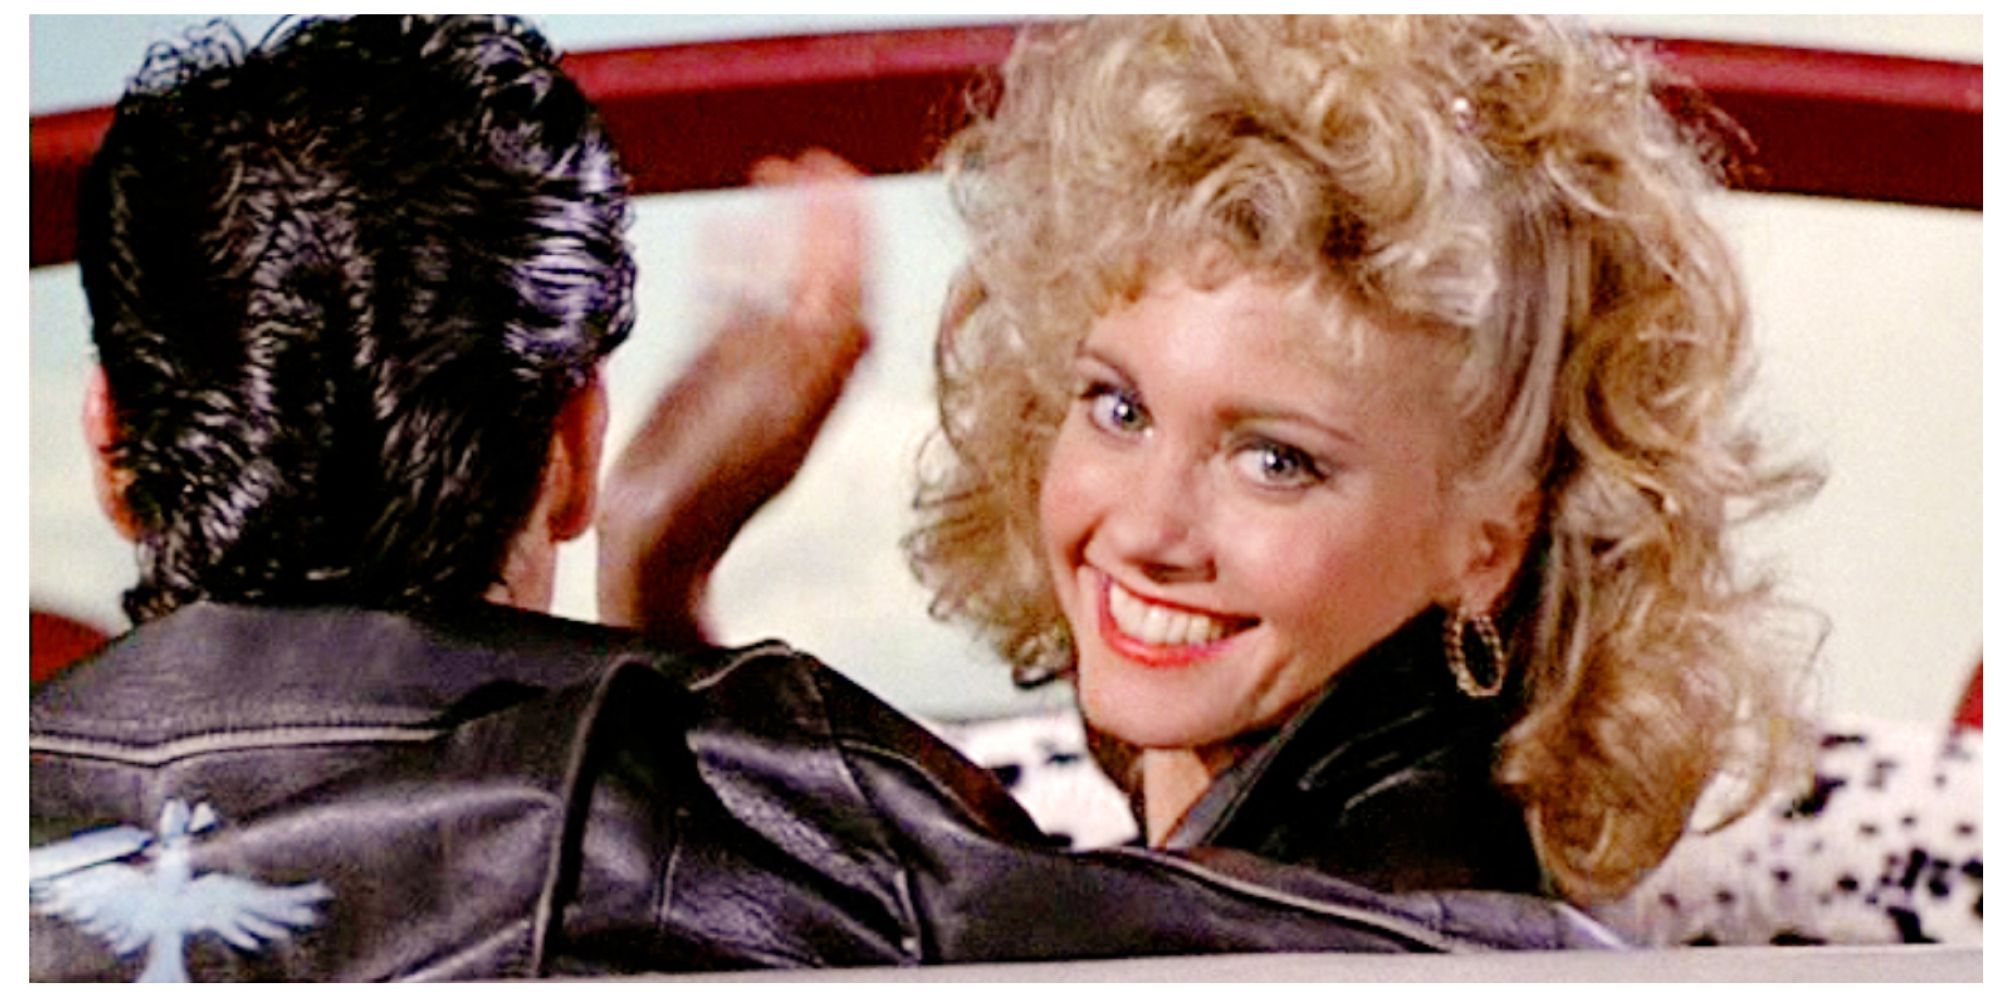 The final shot of Olivia Newton John as Sandy in Grease